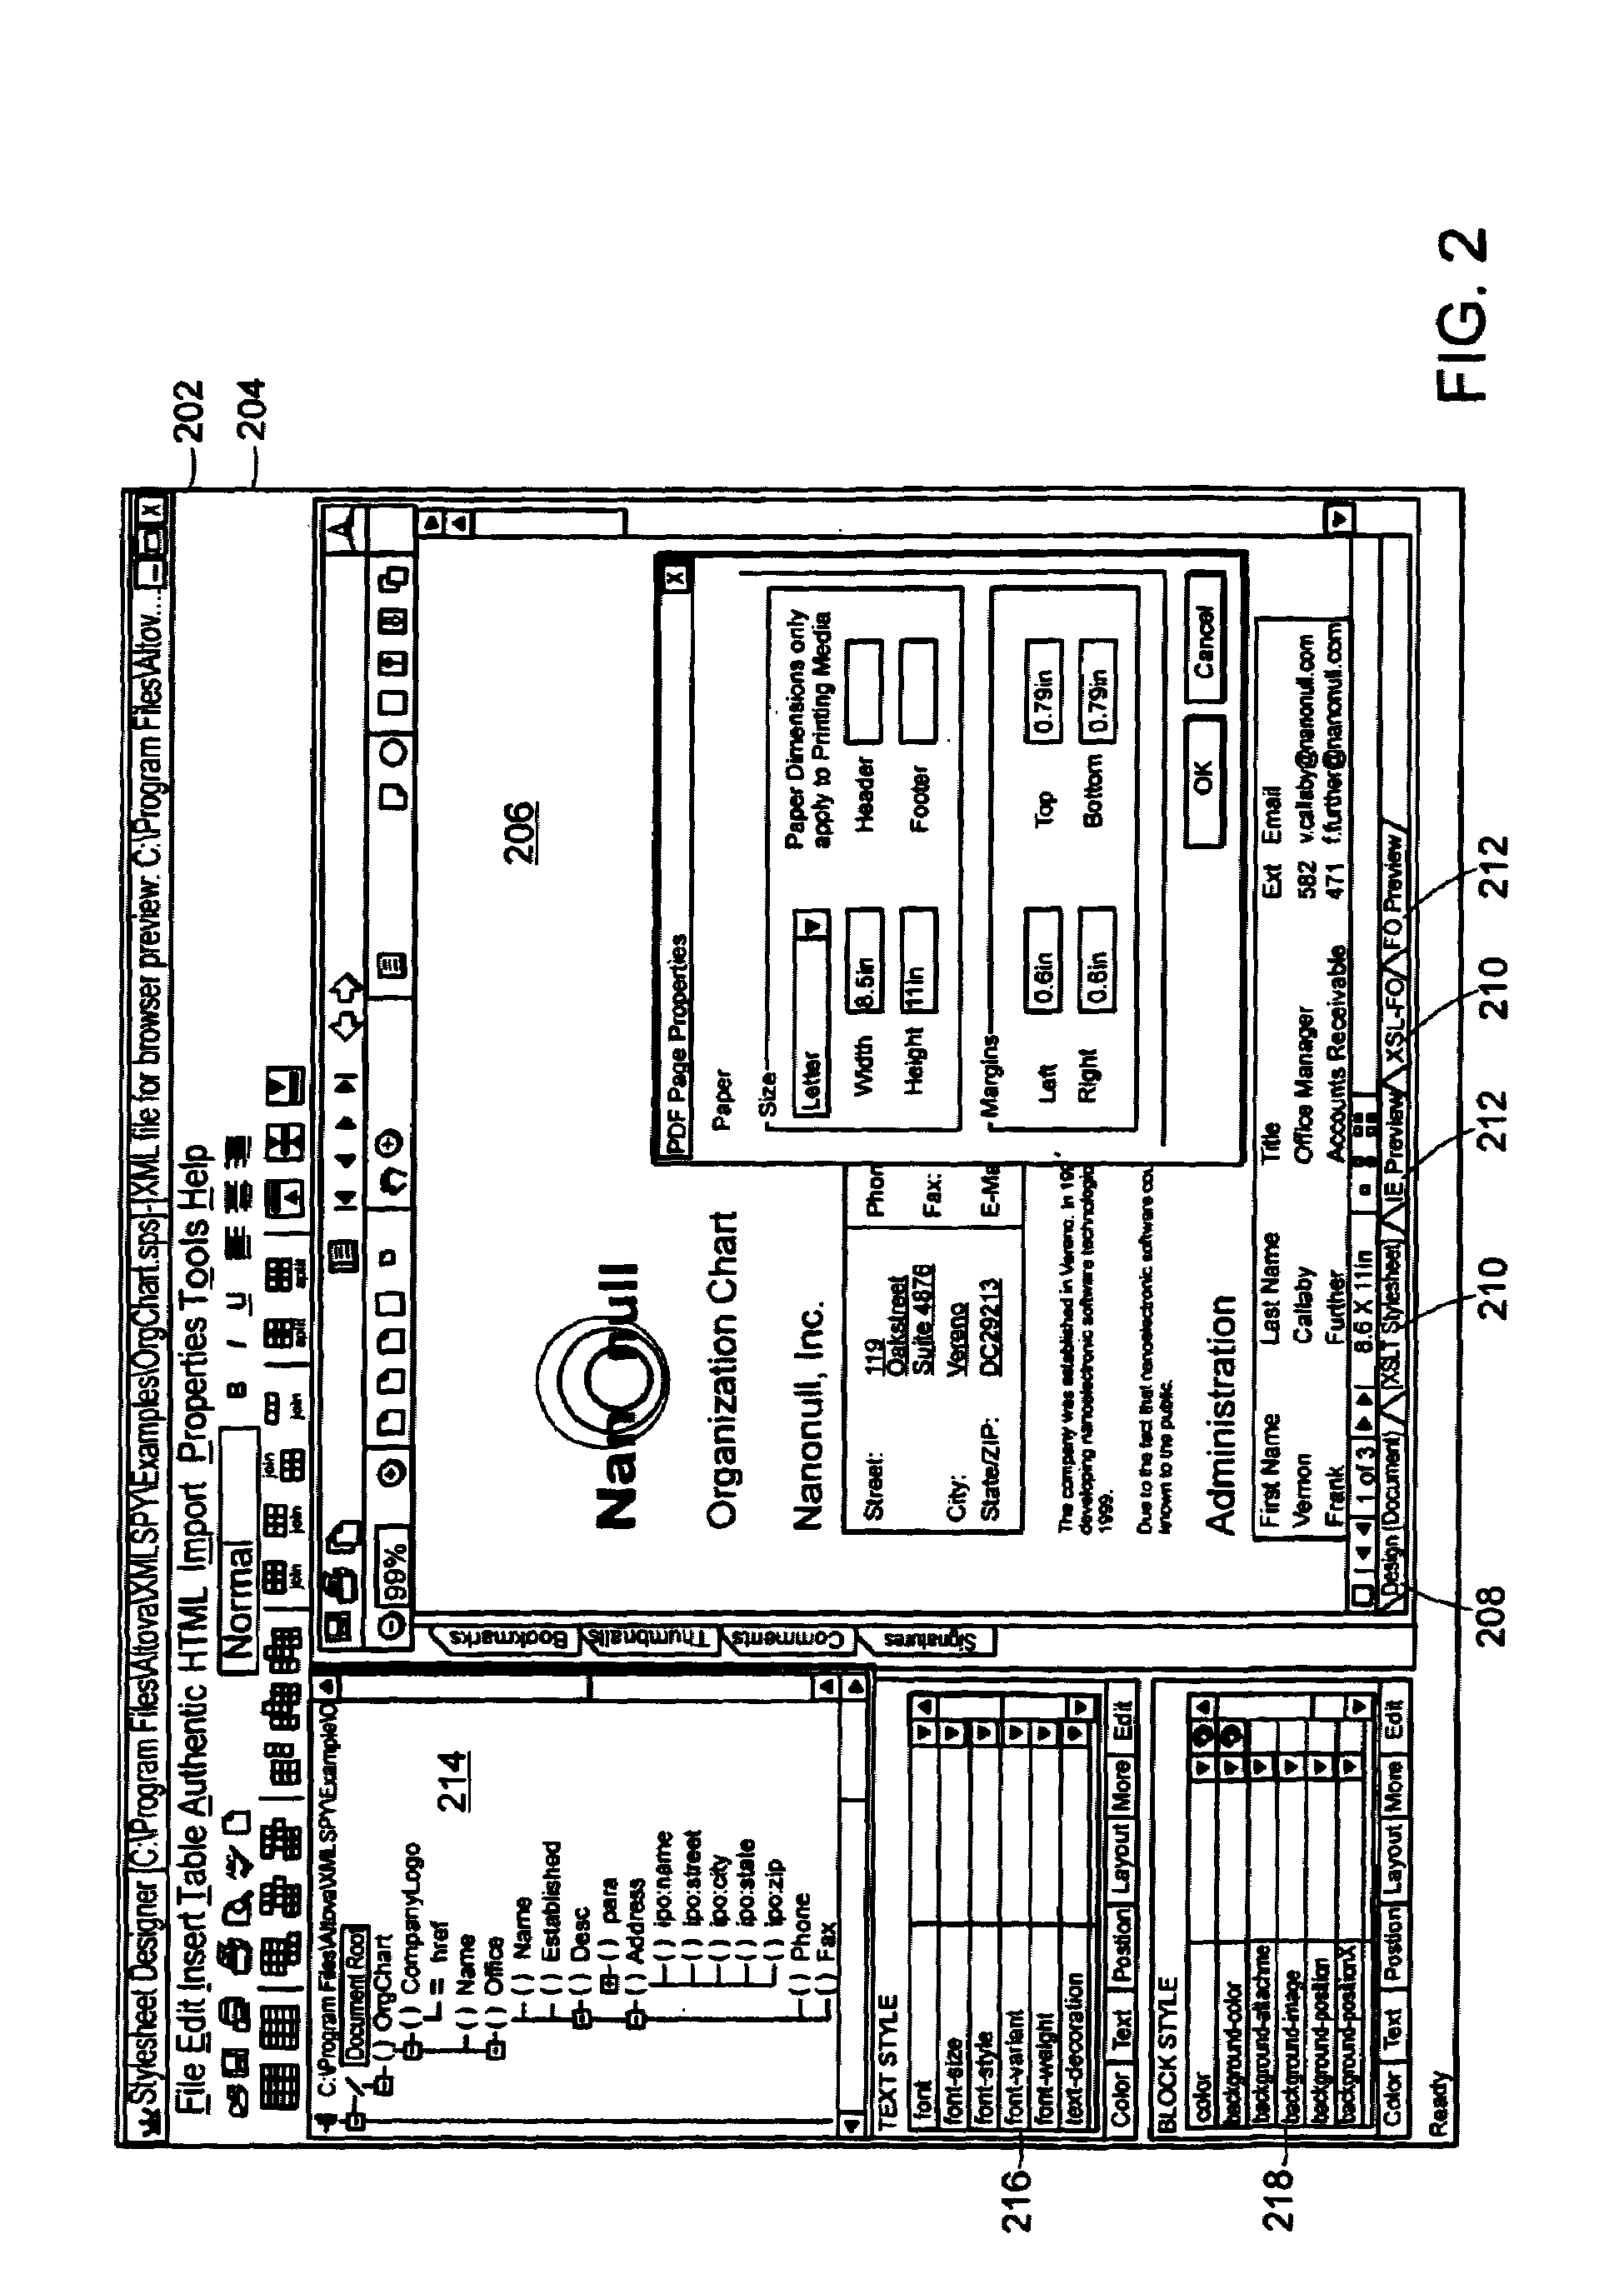 Method and system for automating creation of multiple stylesheet formats using an integrated visual design environment